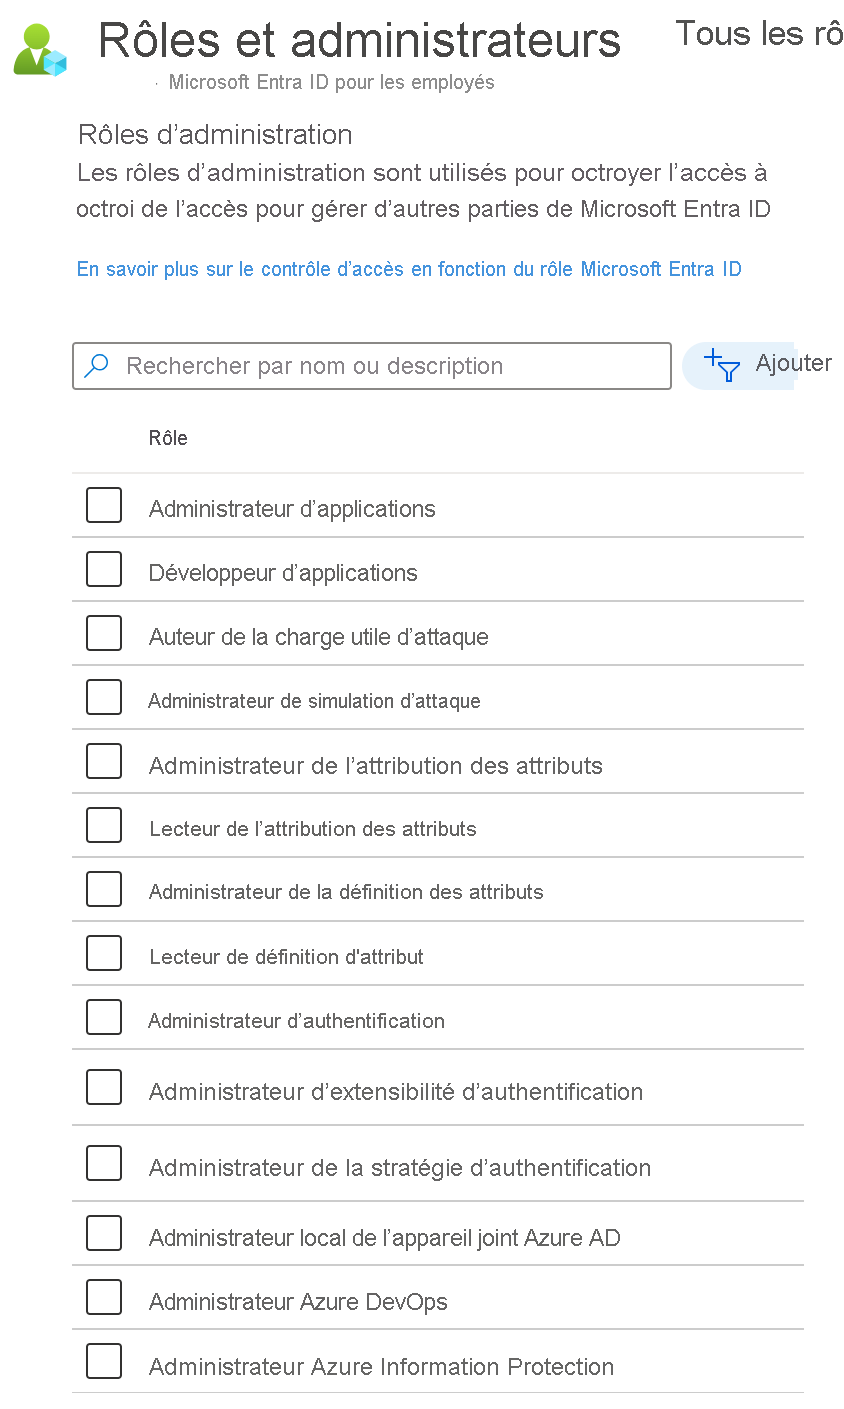 Screenshot of the Roles and administrators screen in Azure A D. List of roles that can be applied.